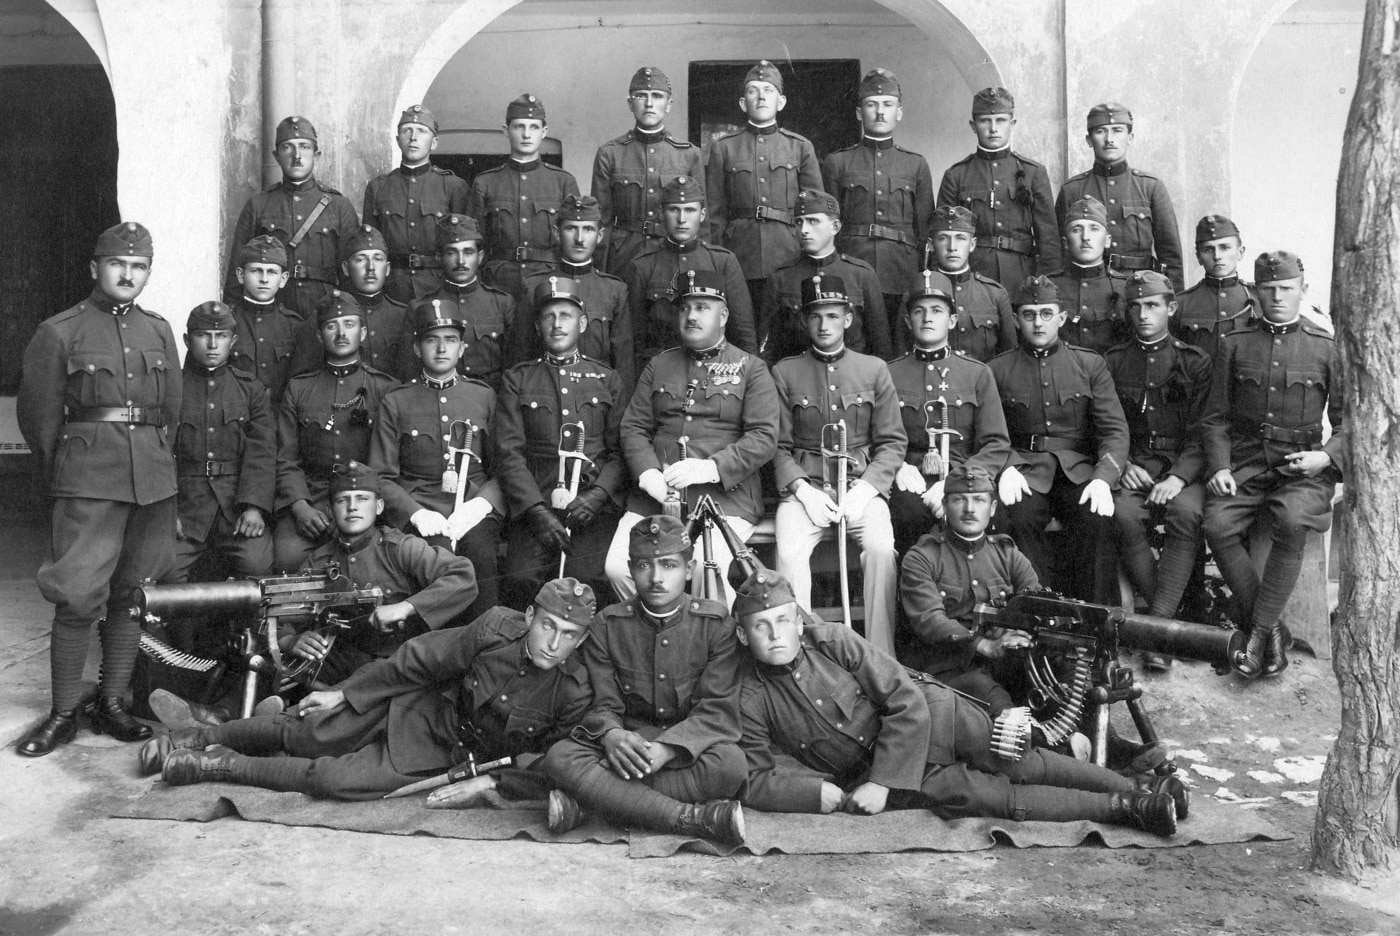 Royal Hungarian Army soldiers with Schwarzlose machine guns in 1924